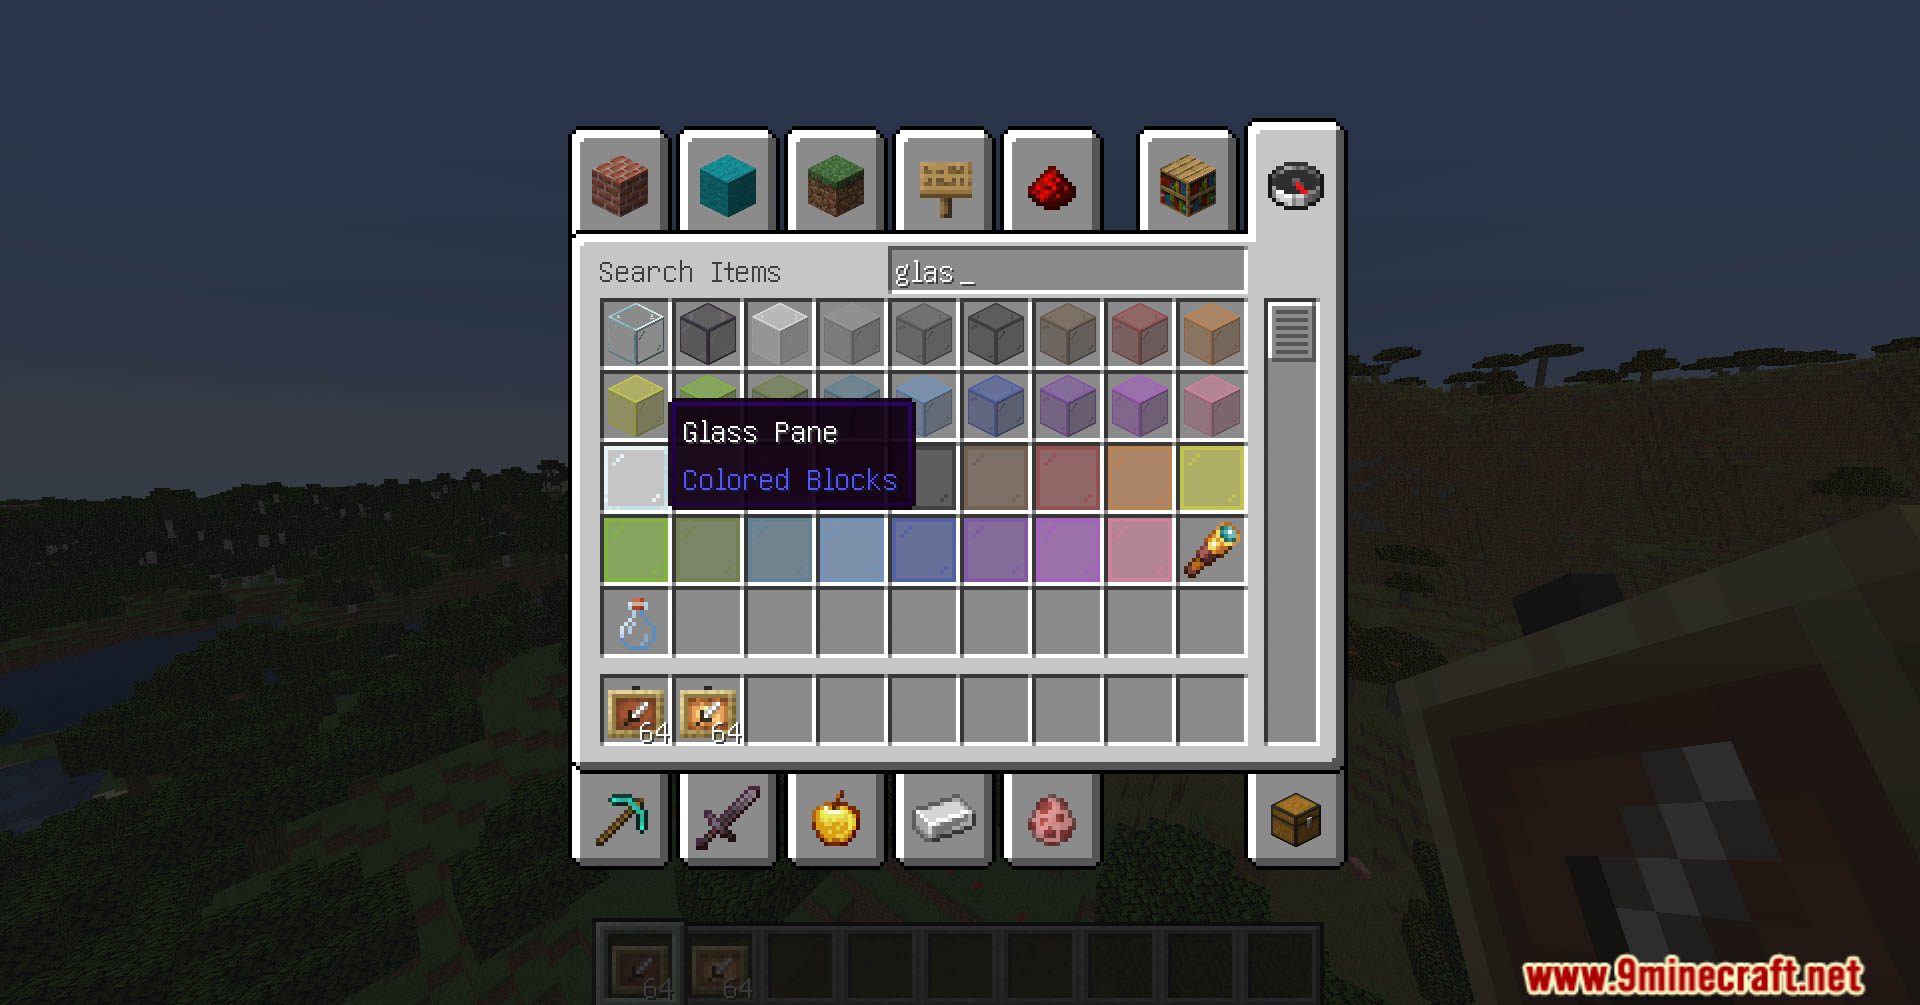 minecraft invisible item frame command